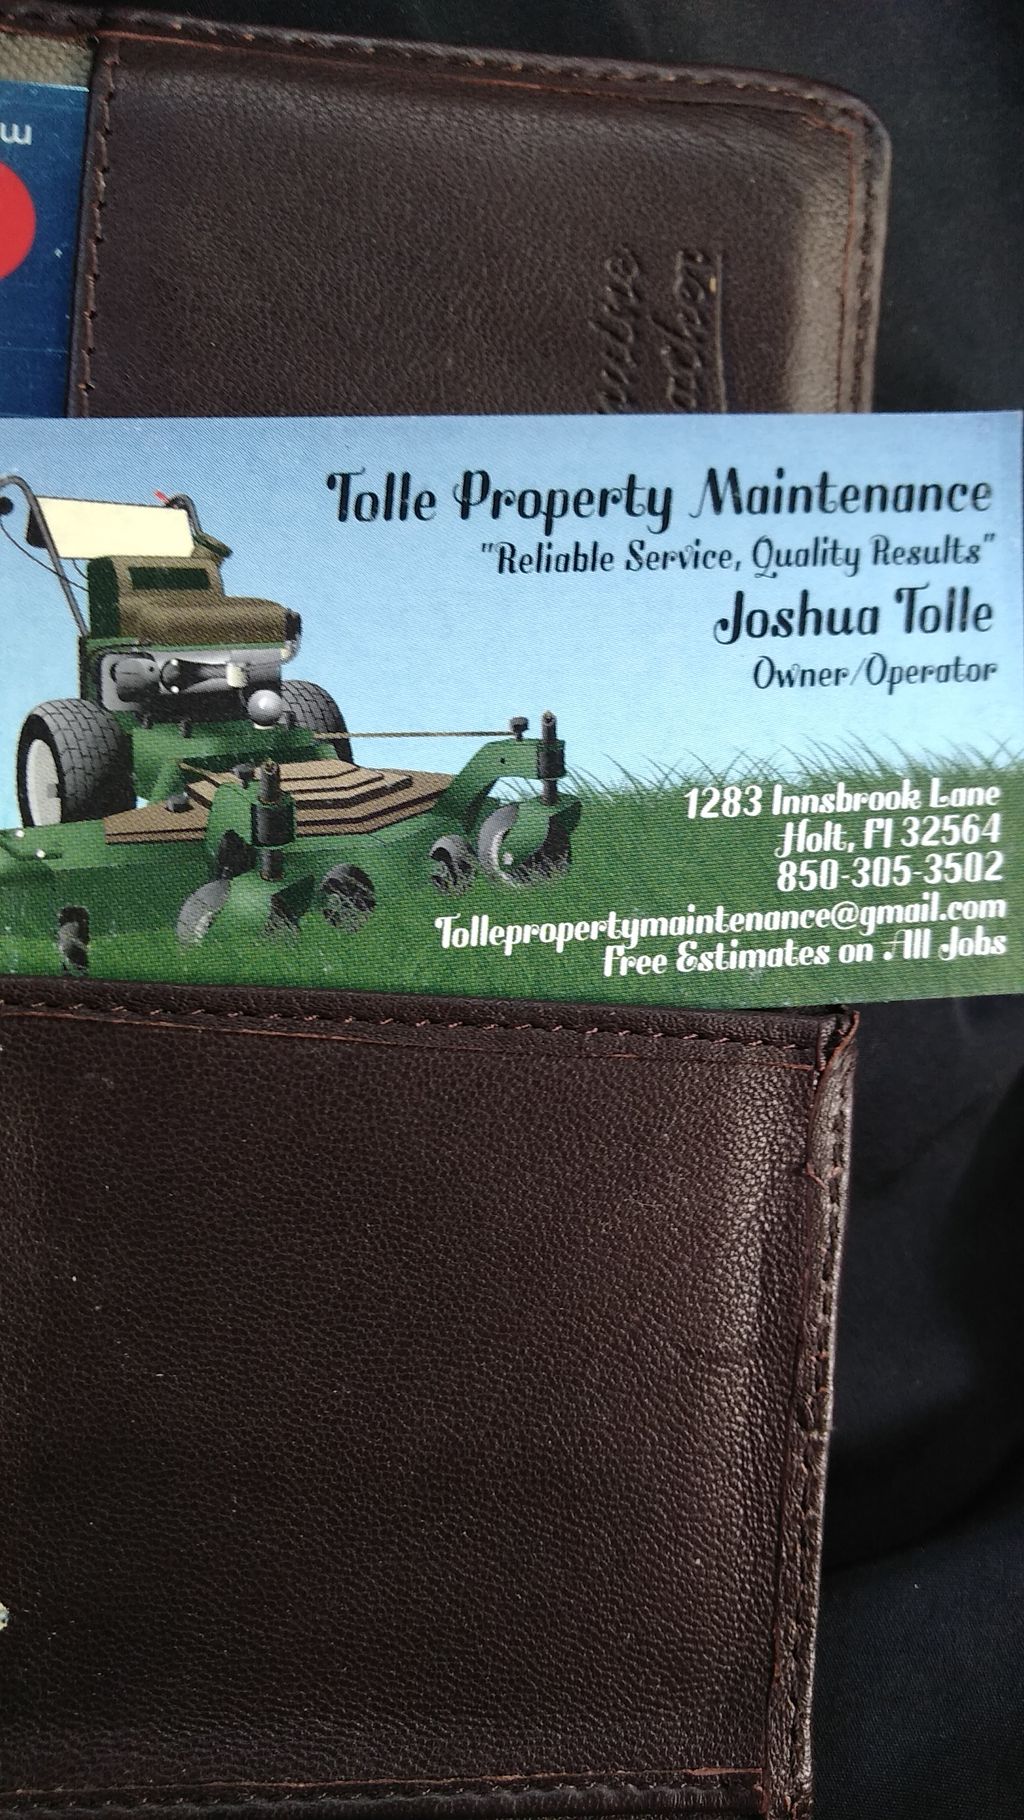 Tolle Property Maintenance